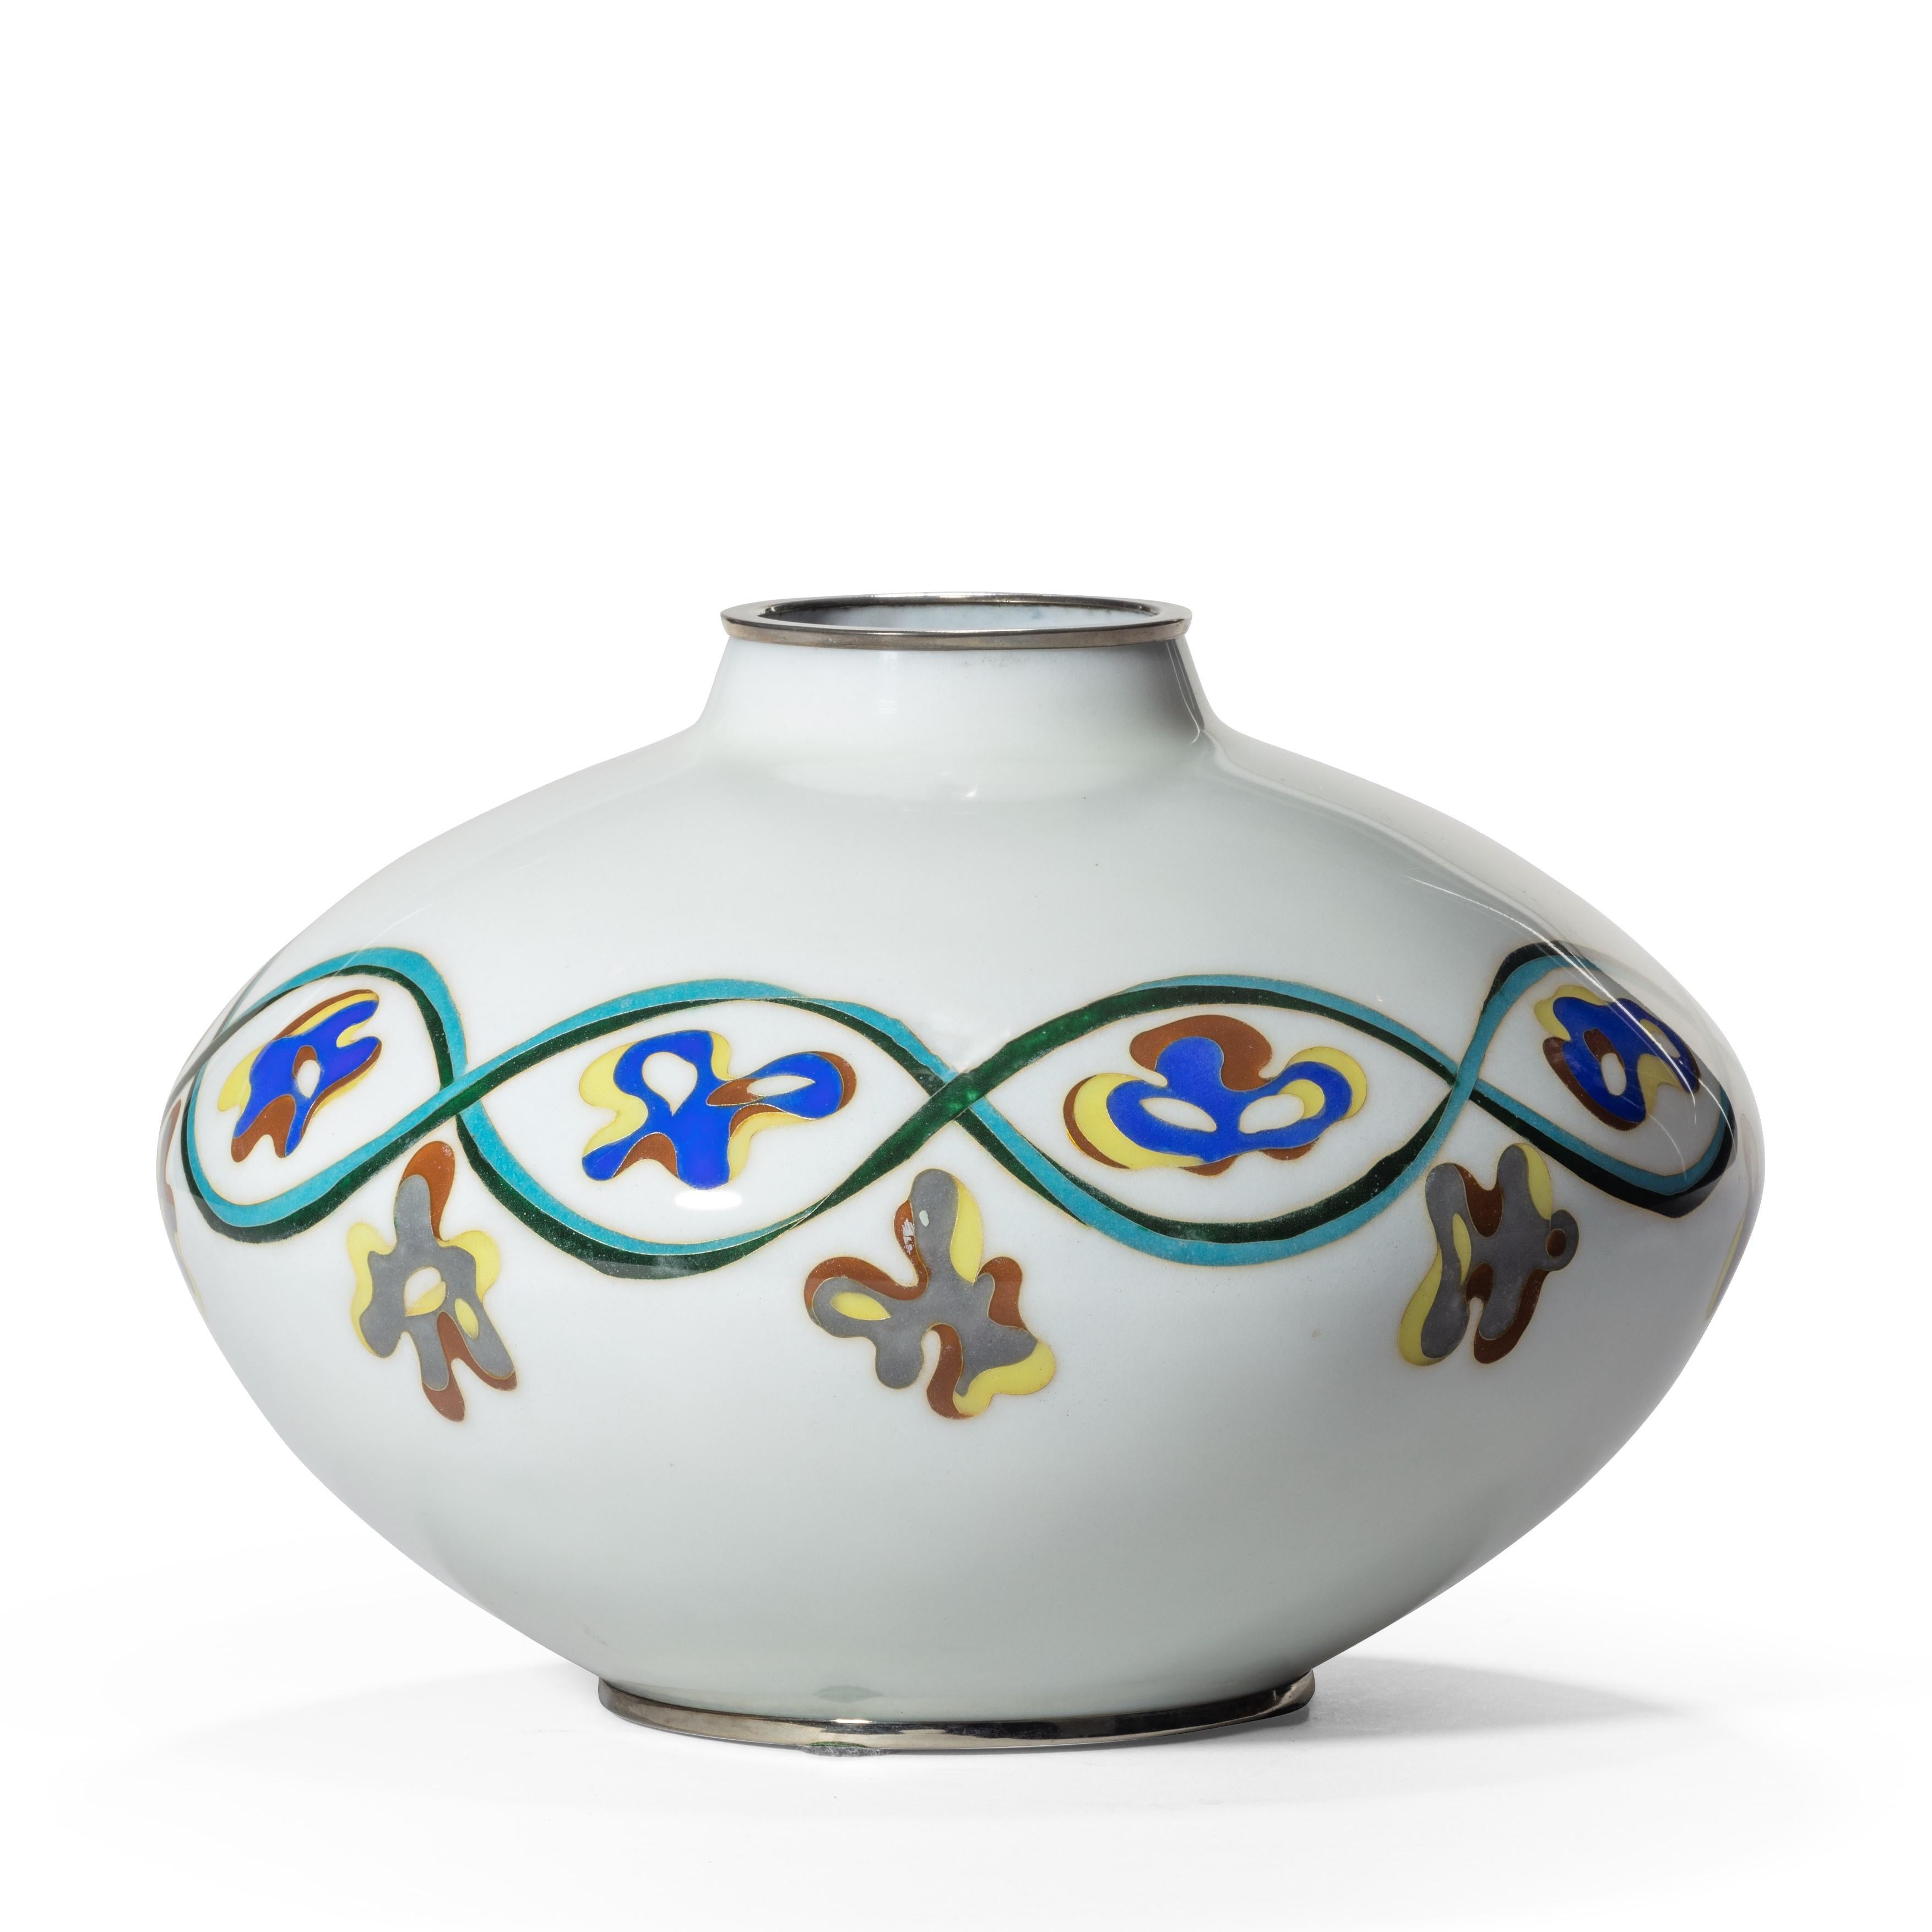 An unusual Showa period cloisonné vase, of squat ovoid form with continuous guilloche in turquoise and green enamels enclosing abstract designs in blue, yellow, brown and grey, with chrome mounts. Japanese, circa 1980.
  